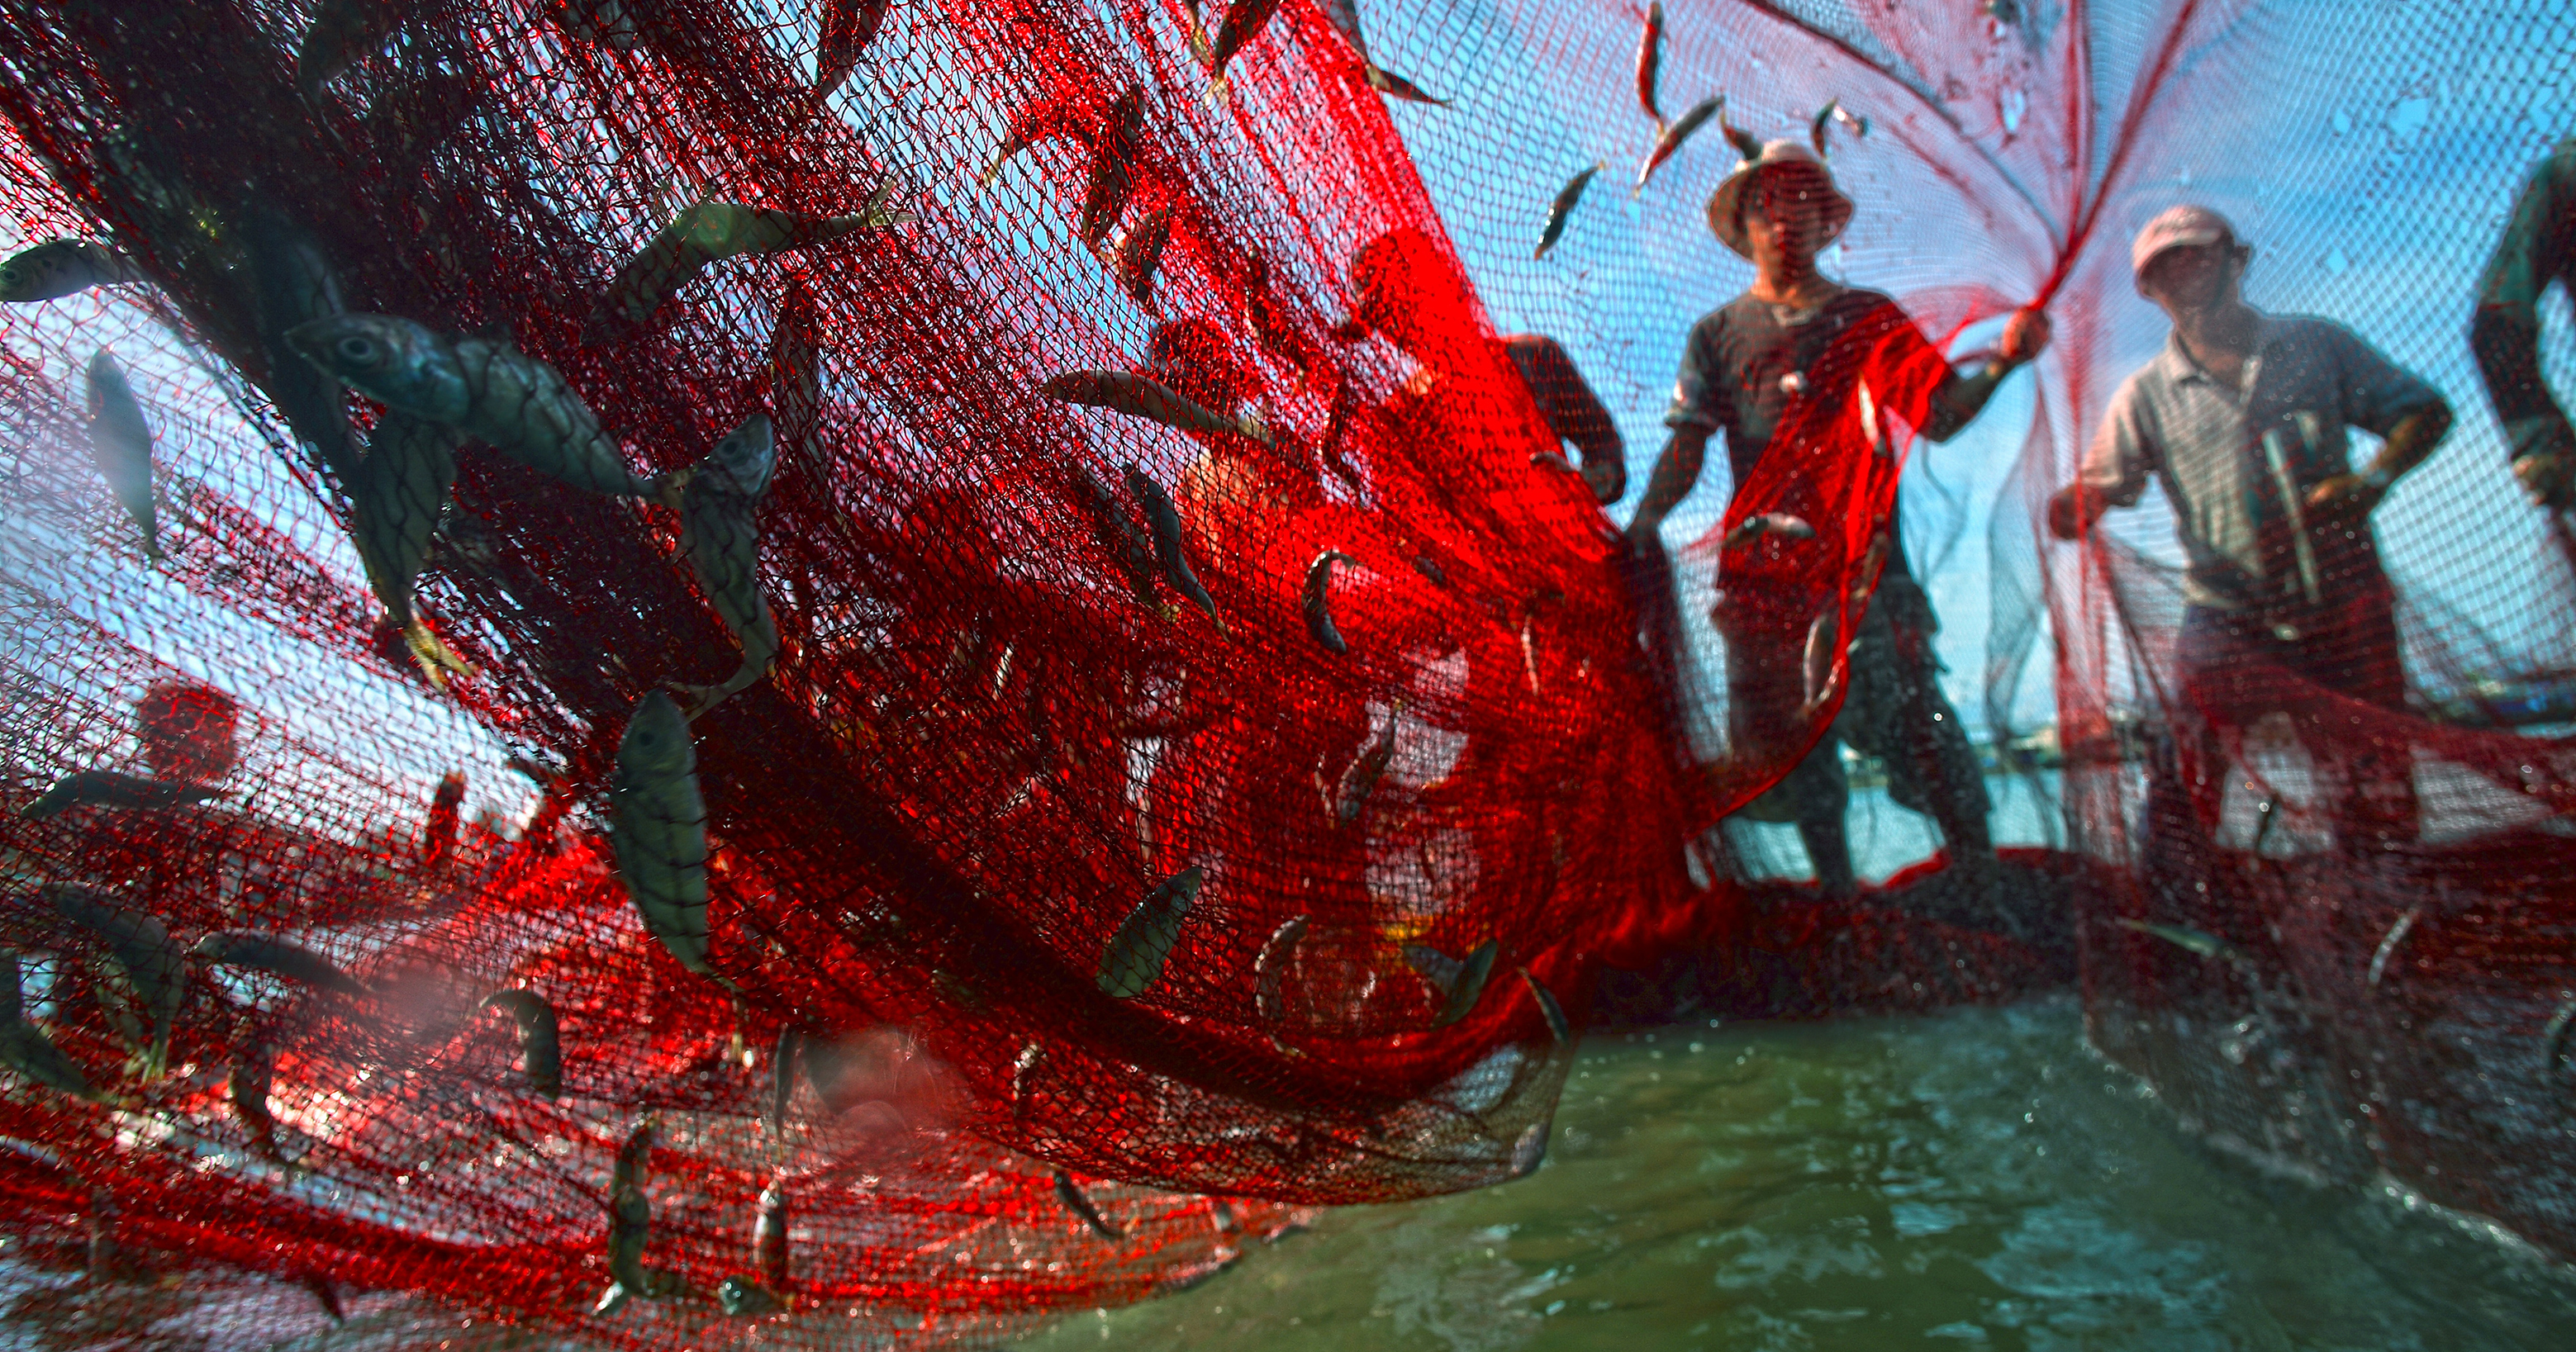 Fishermen bring in the daily catch in south-eastern Vietnam.